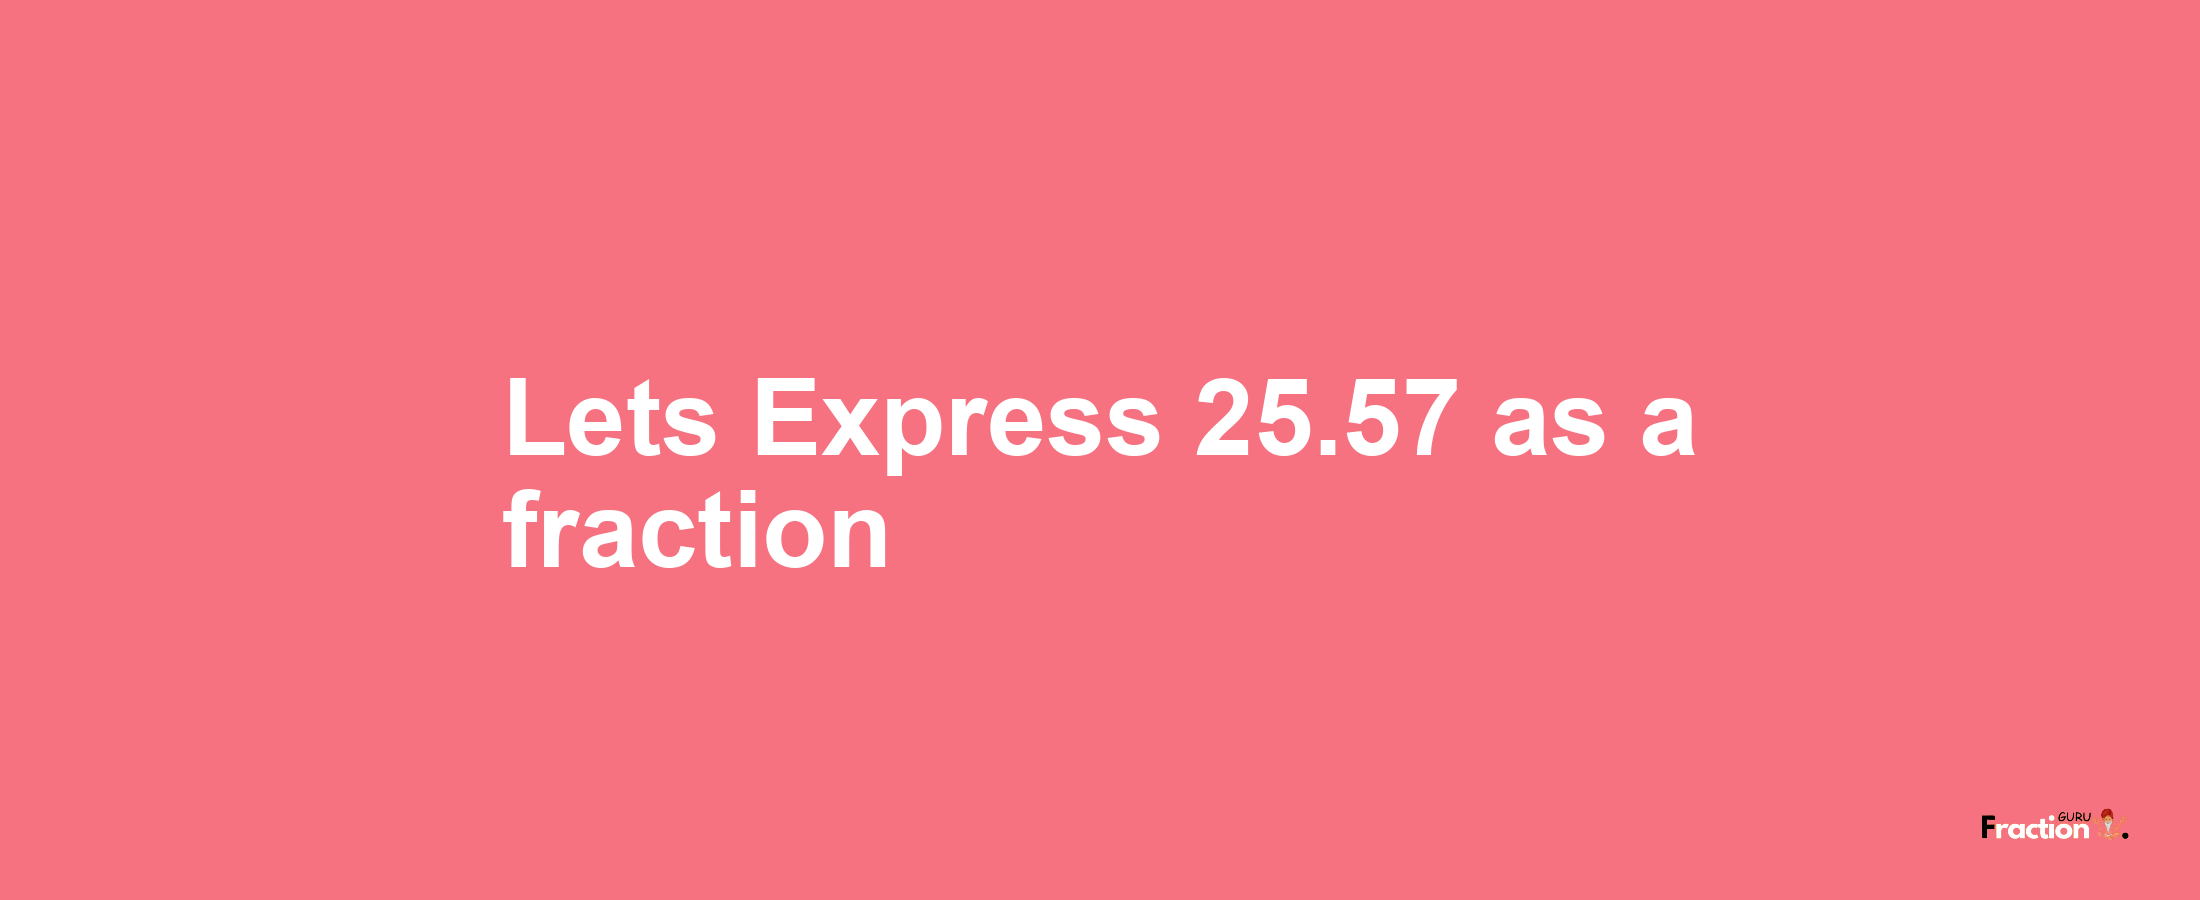 Lets Express 25.57 as afraction